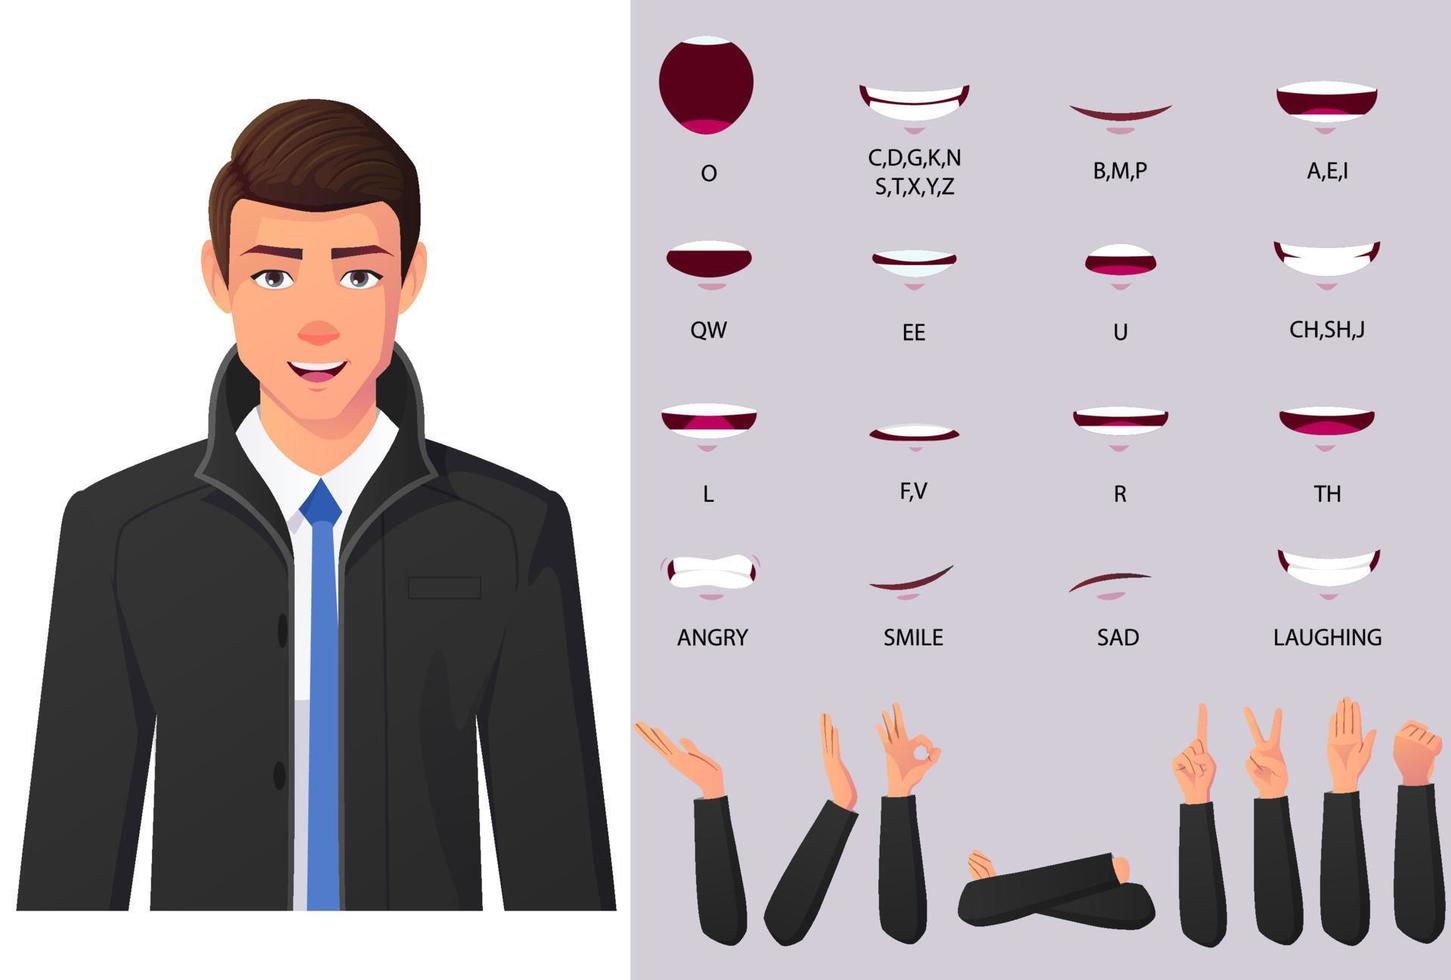 Caucasian Businessman Character Mouth Animation Lip-sync and hand gestures trench coat premium Vector